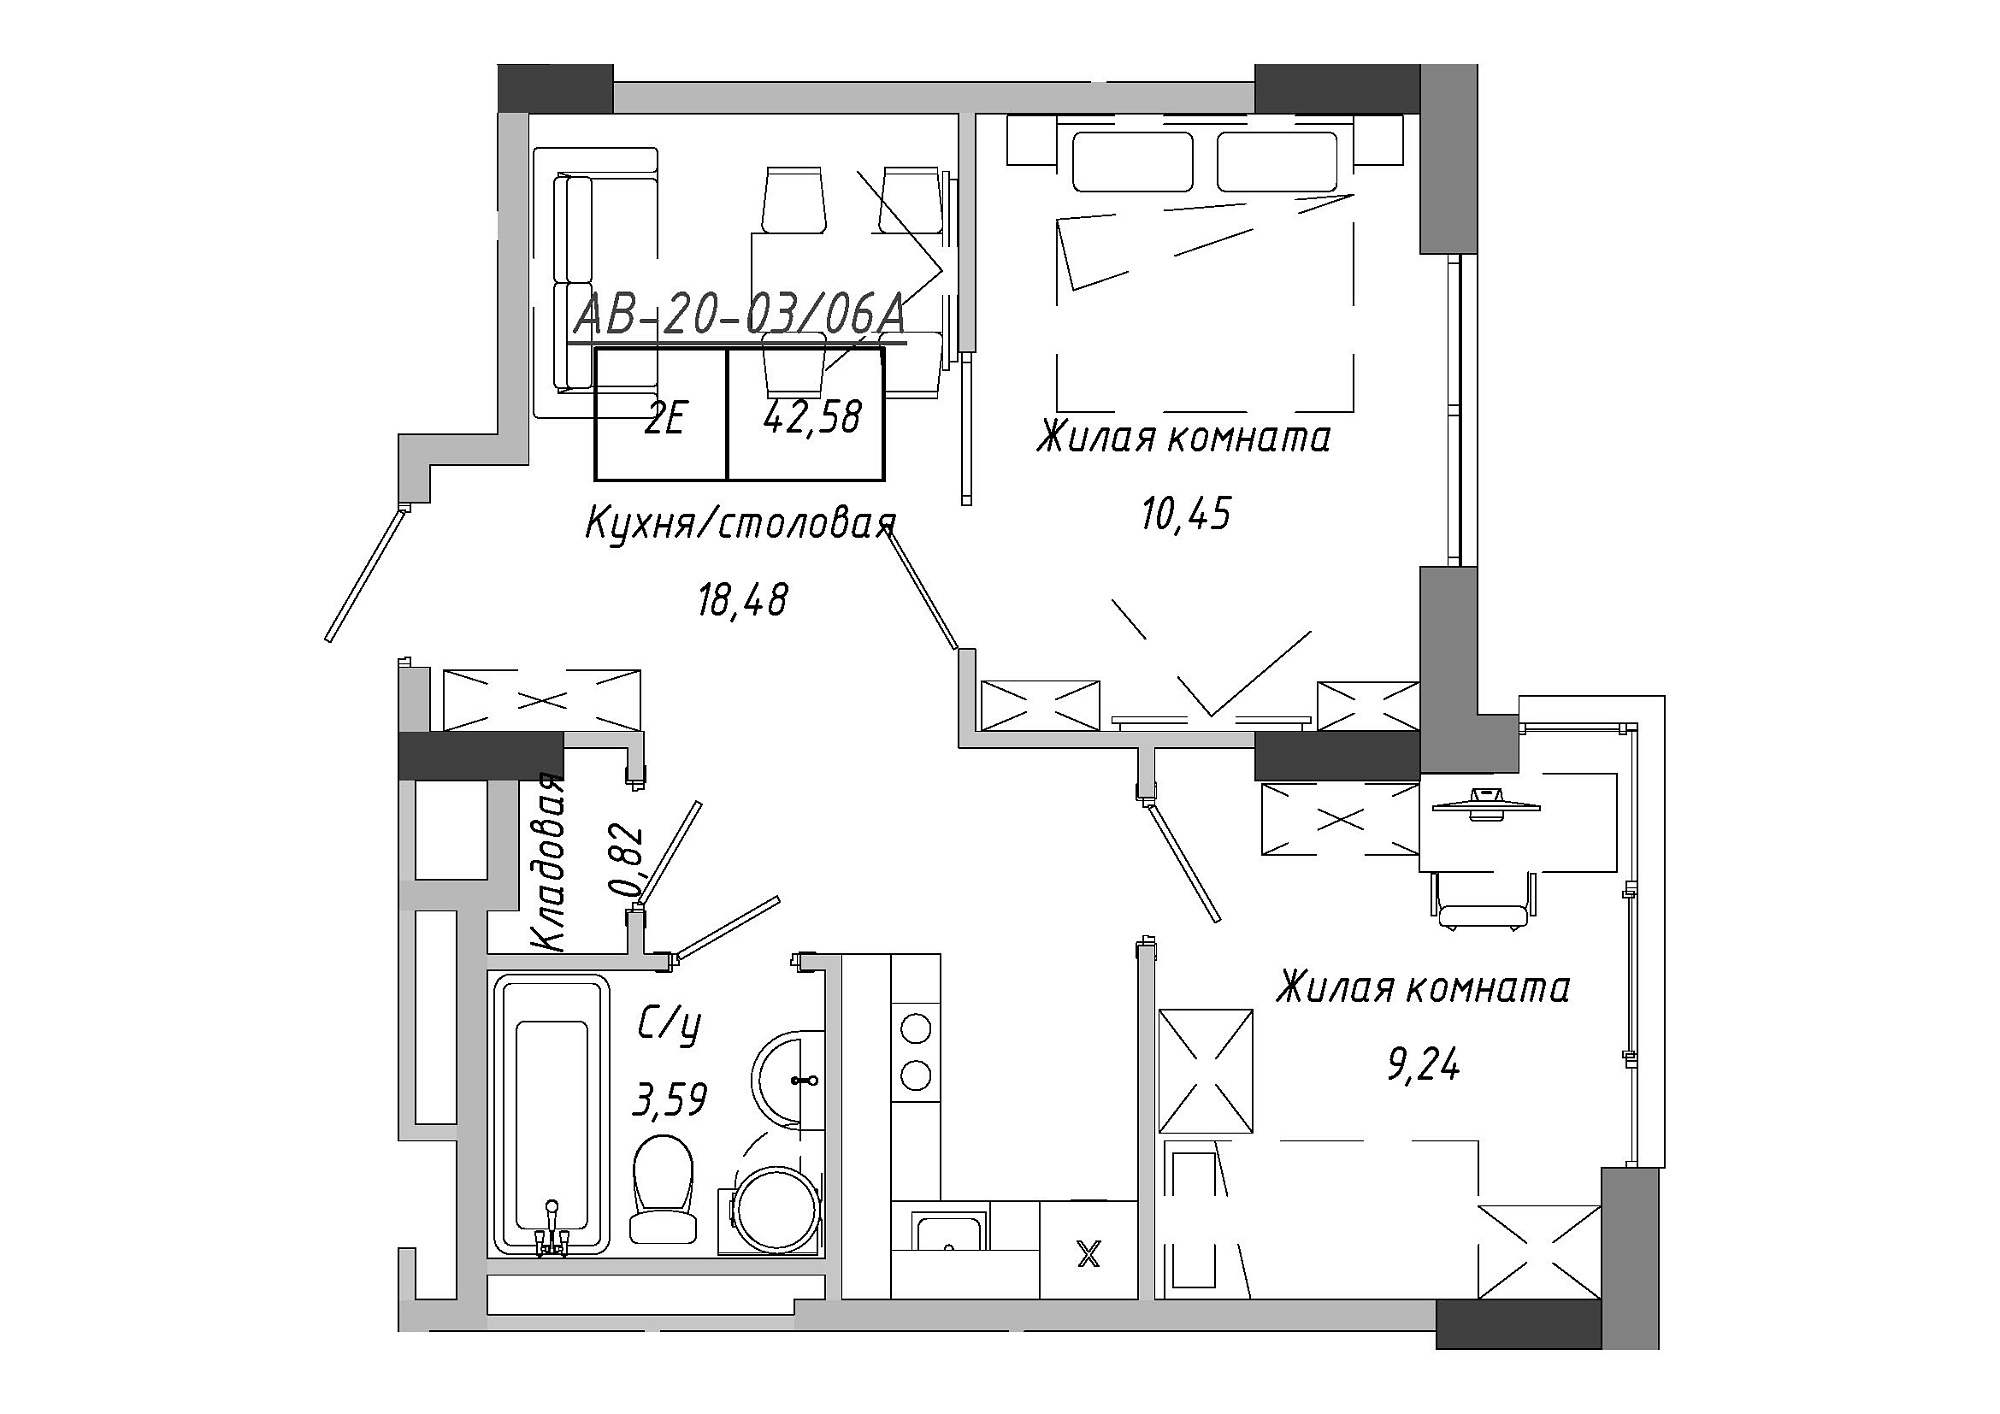 Planning 2-rm flats area 42.58m2, AB-20-03/0006а.